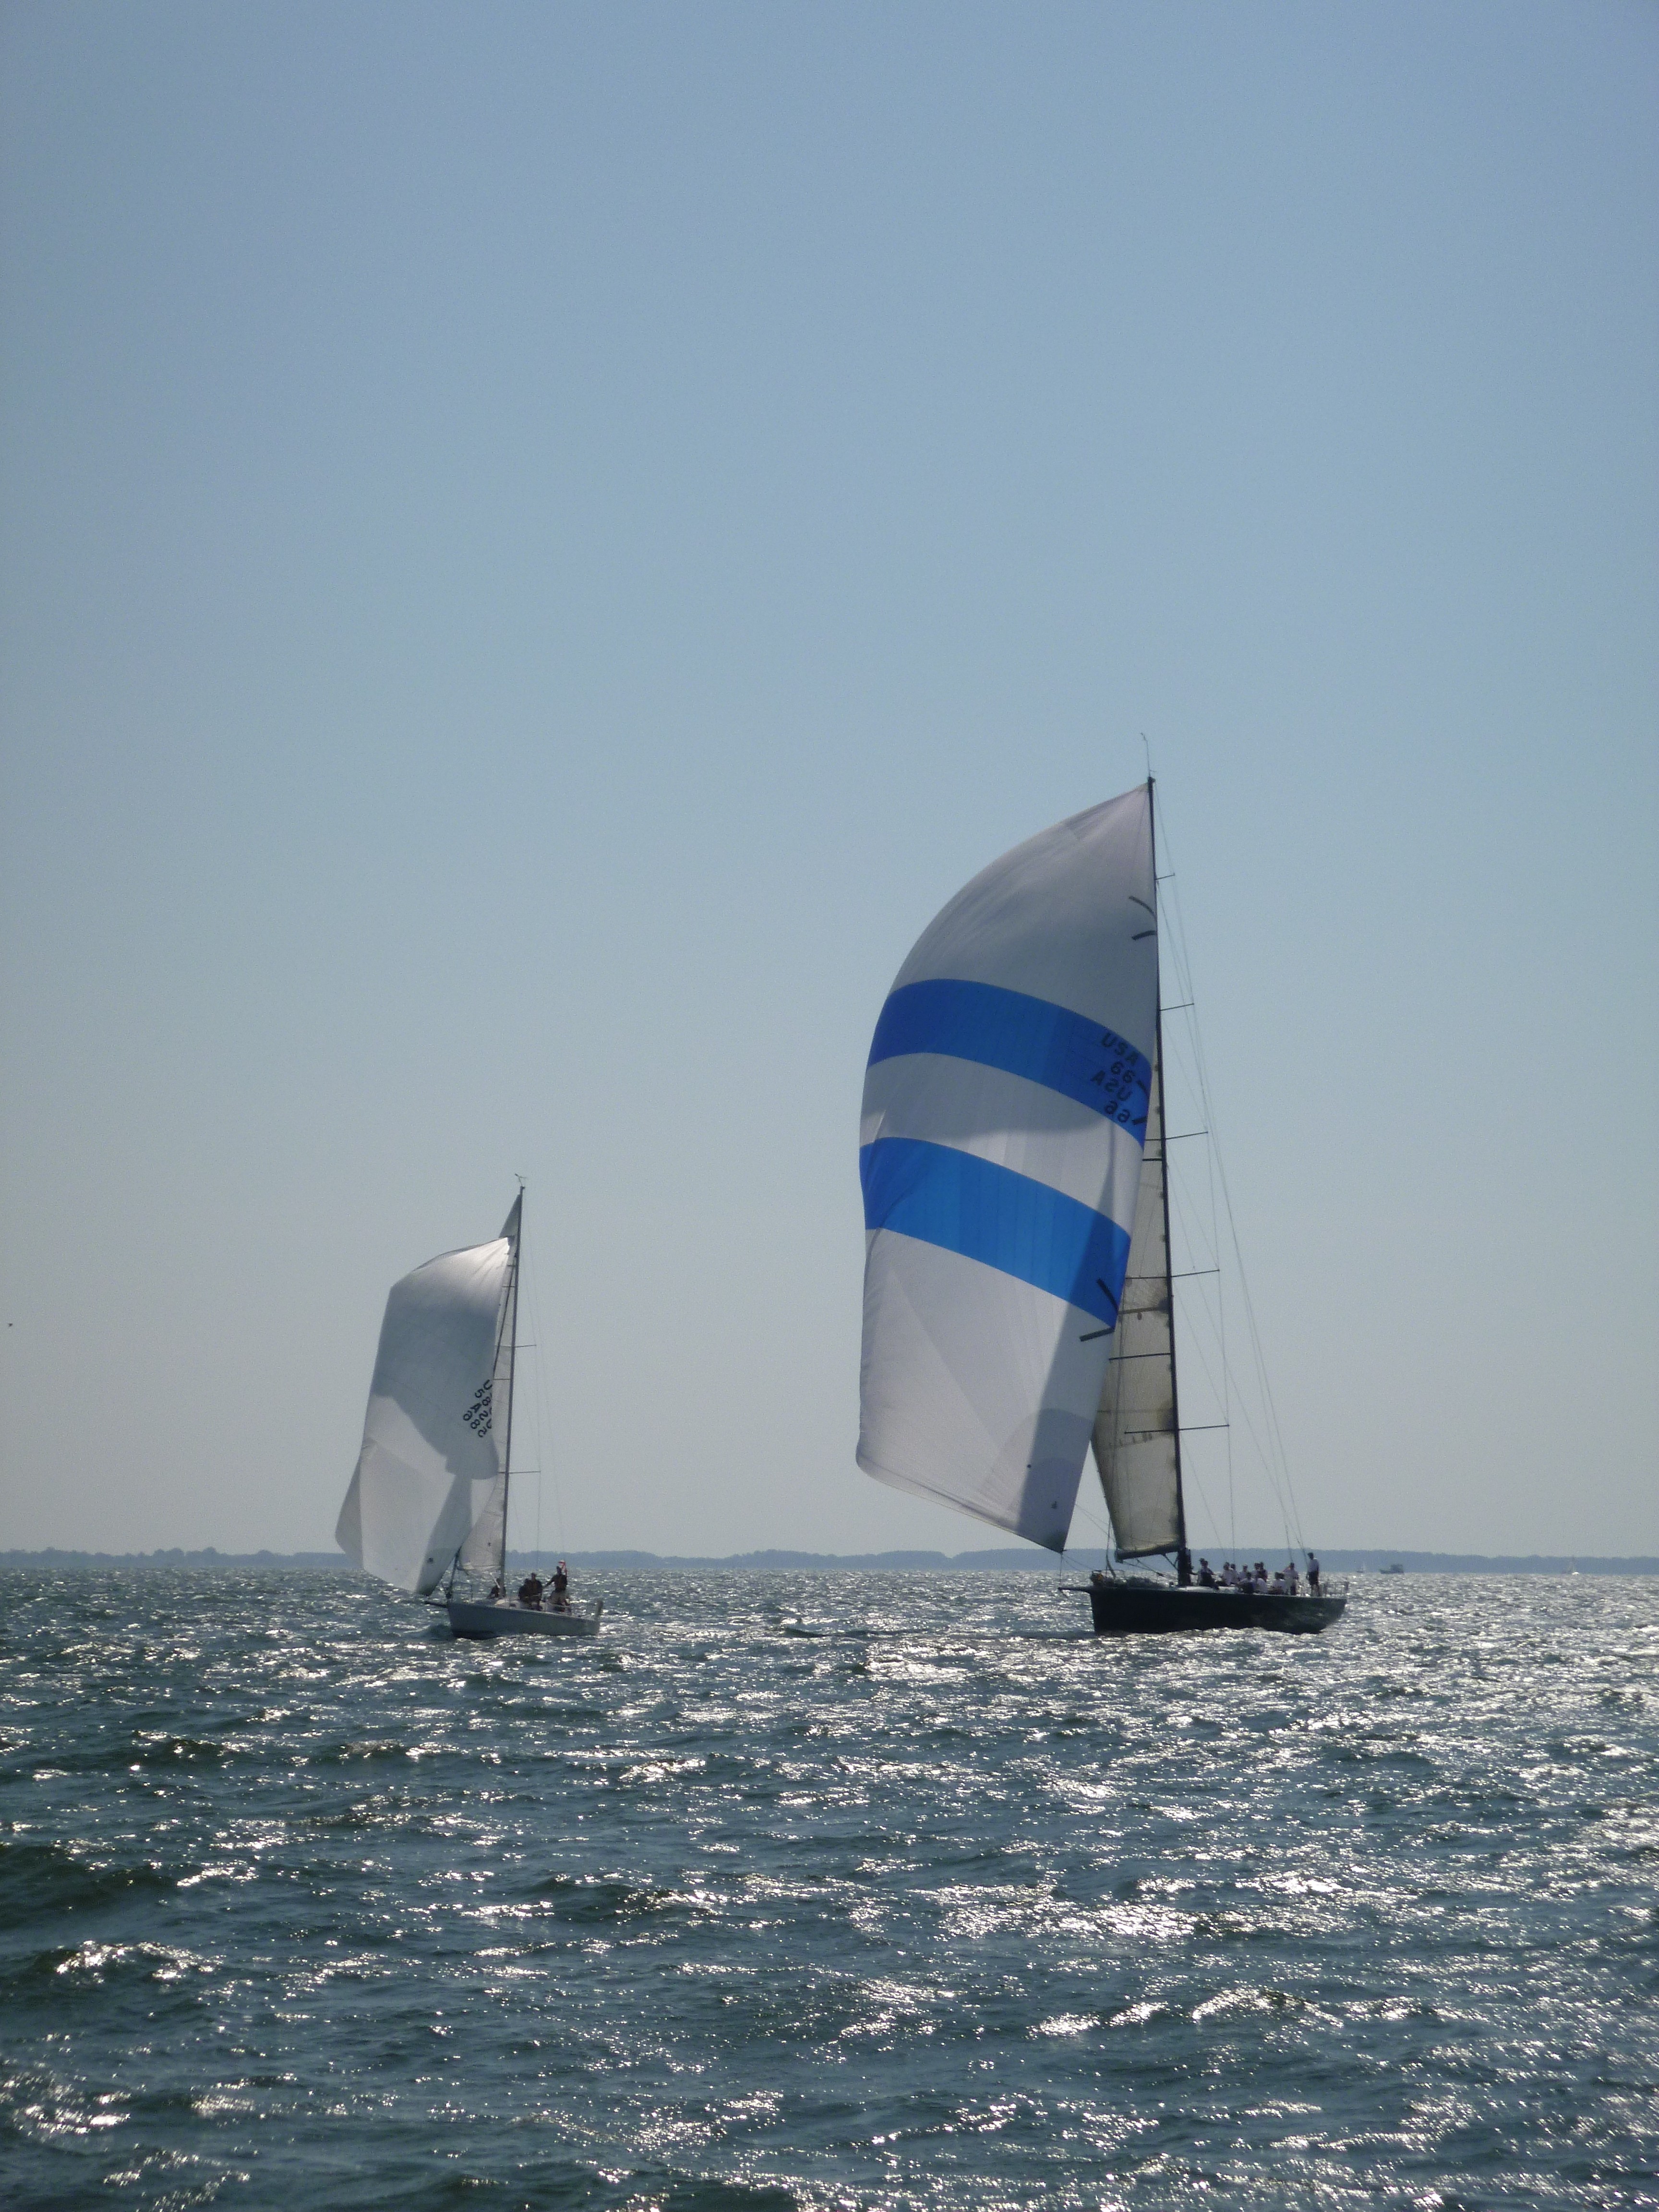 Donnybrook (80+ foot race boat) sailing through the fleet of Hospice Cup